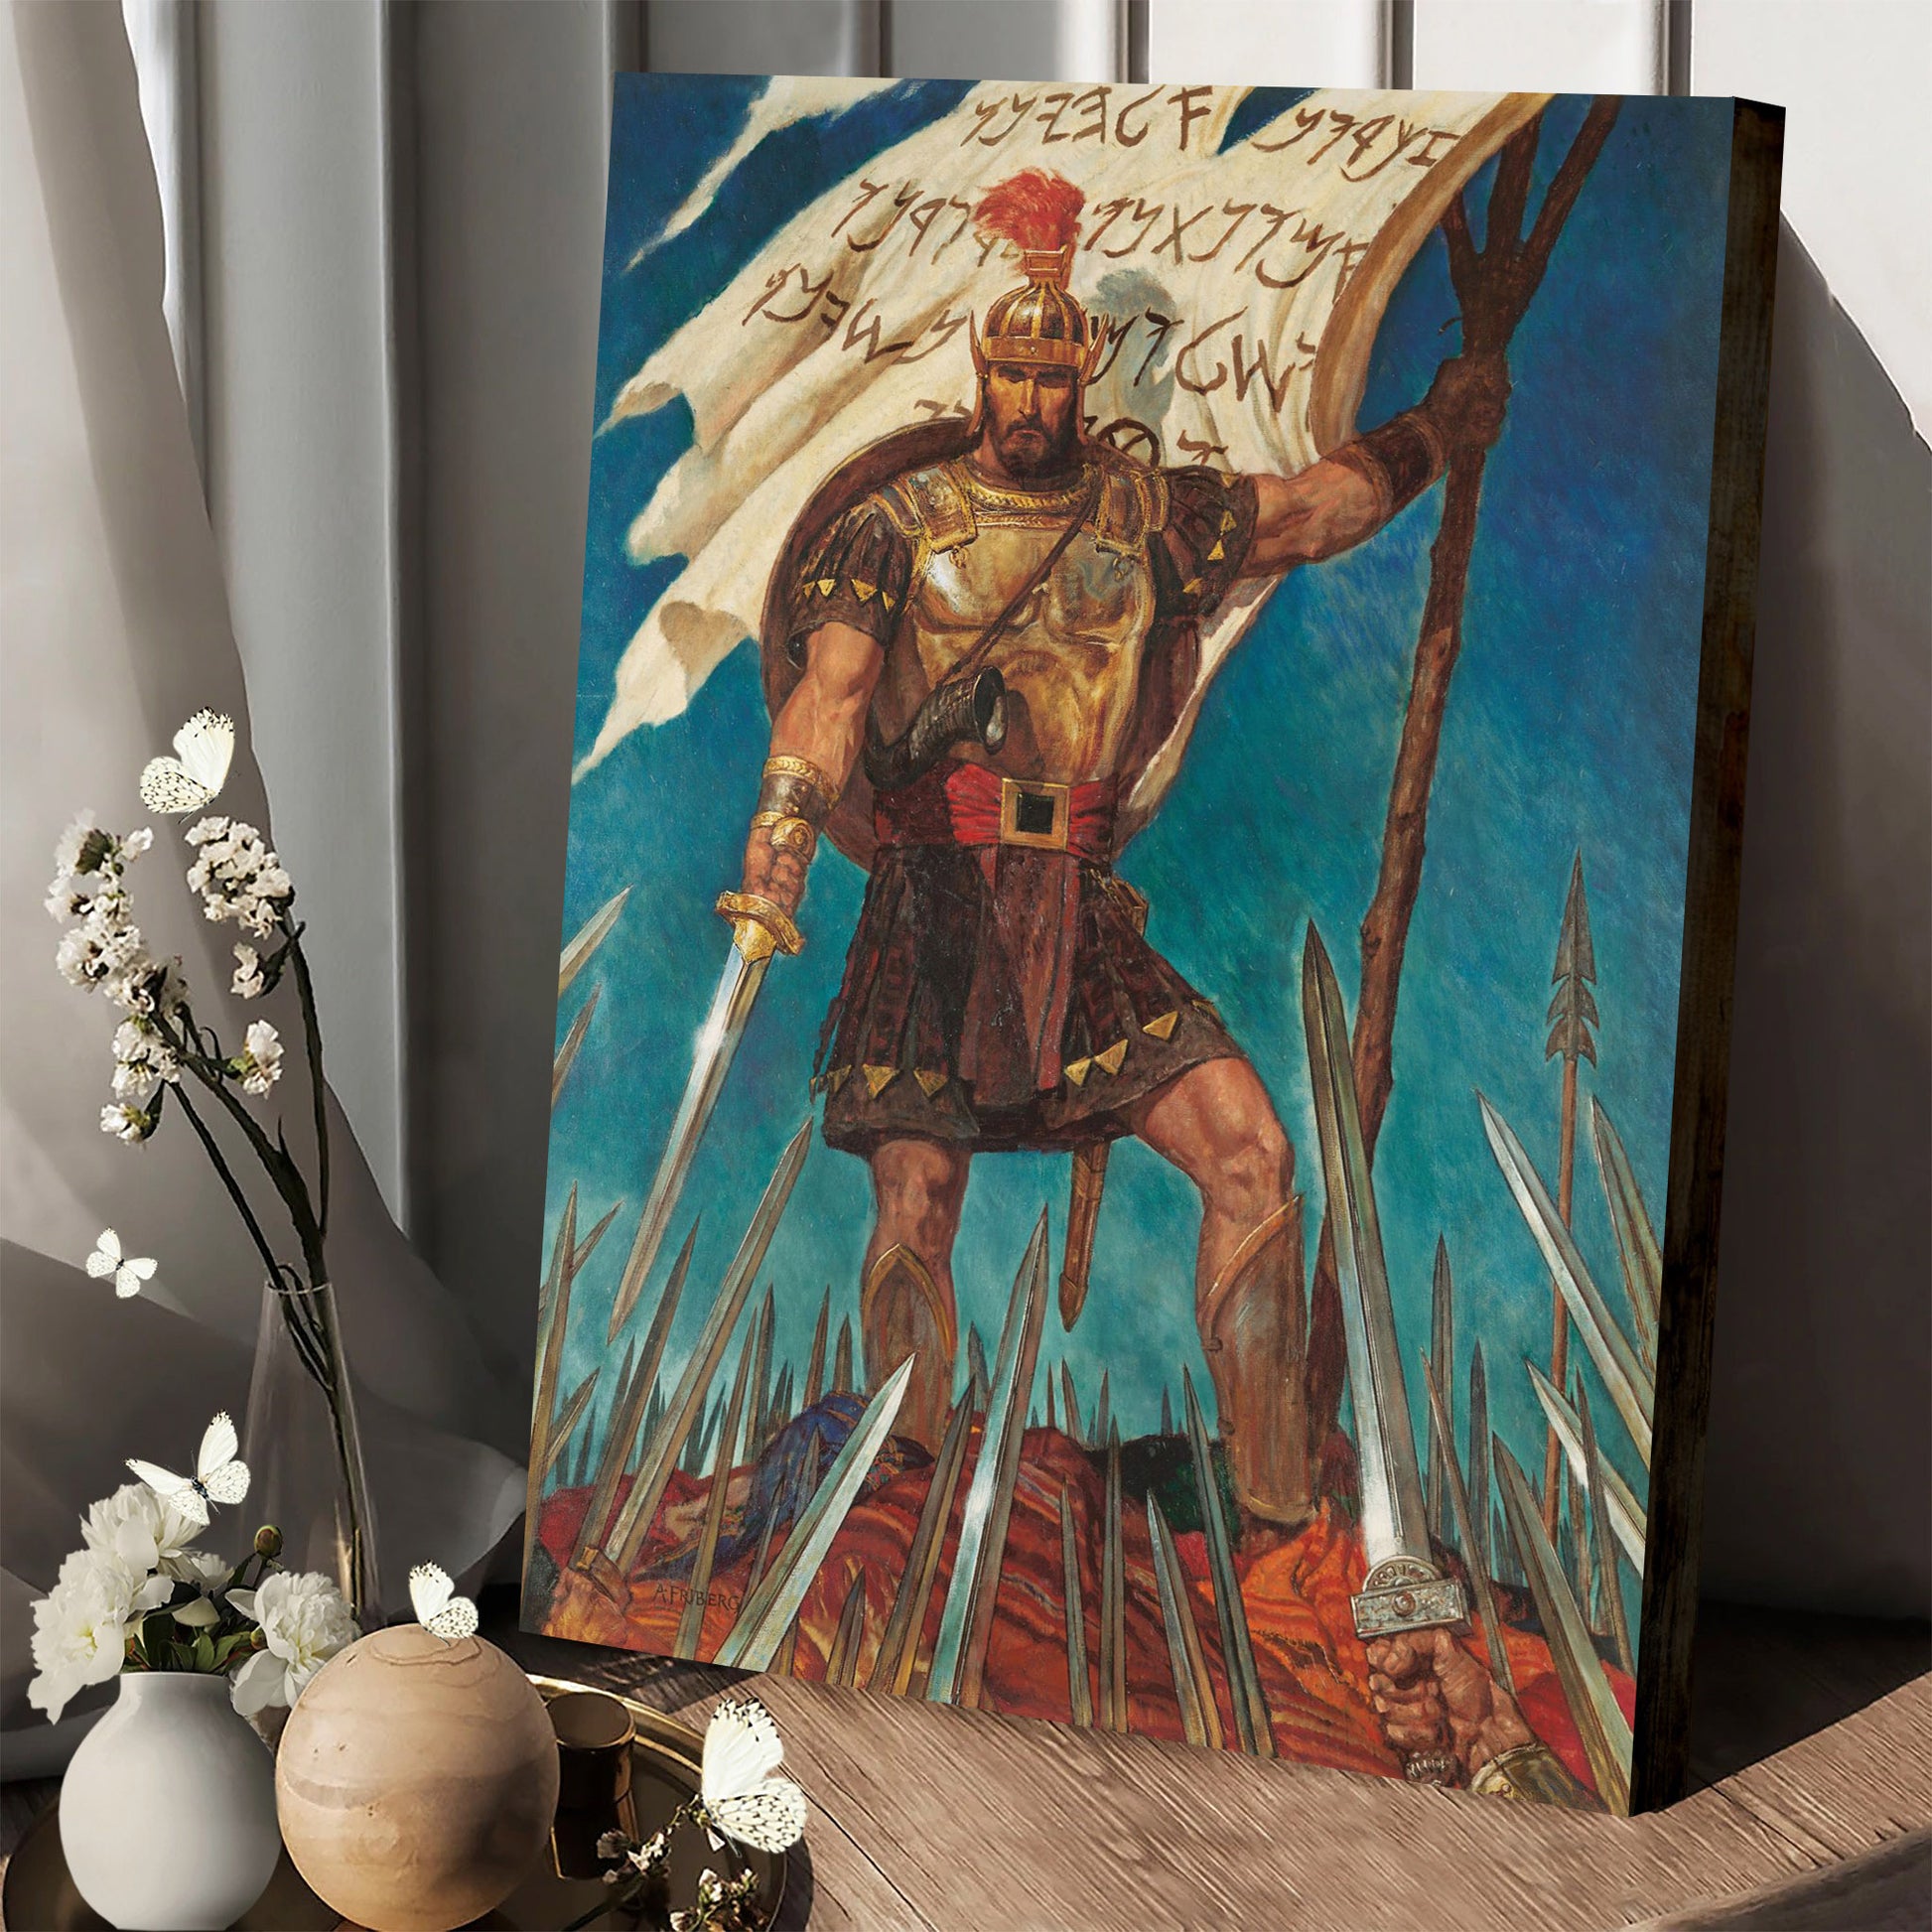 Captain Moroni Raises The Title Of Liberty Canvas Pictures - Religious Canvas Wall Art - Scriptures Wall Decor